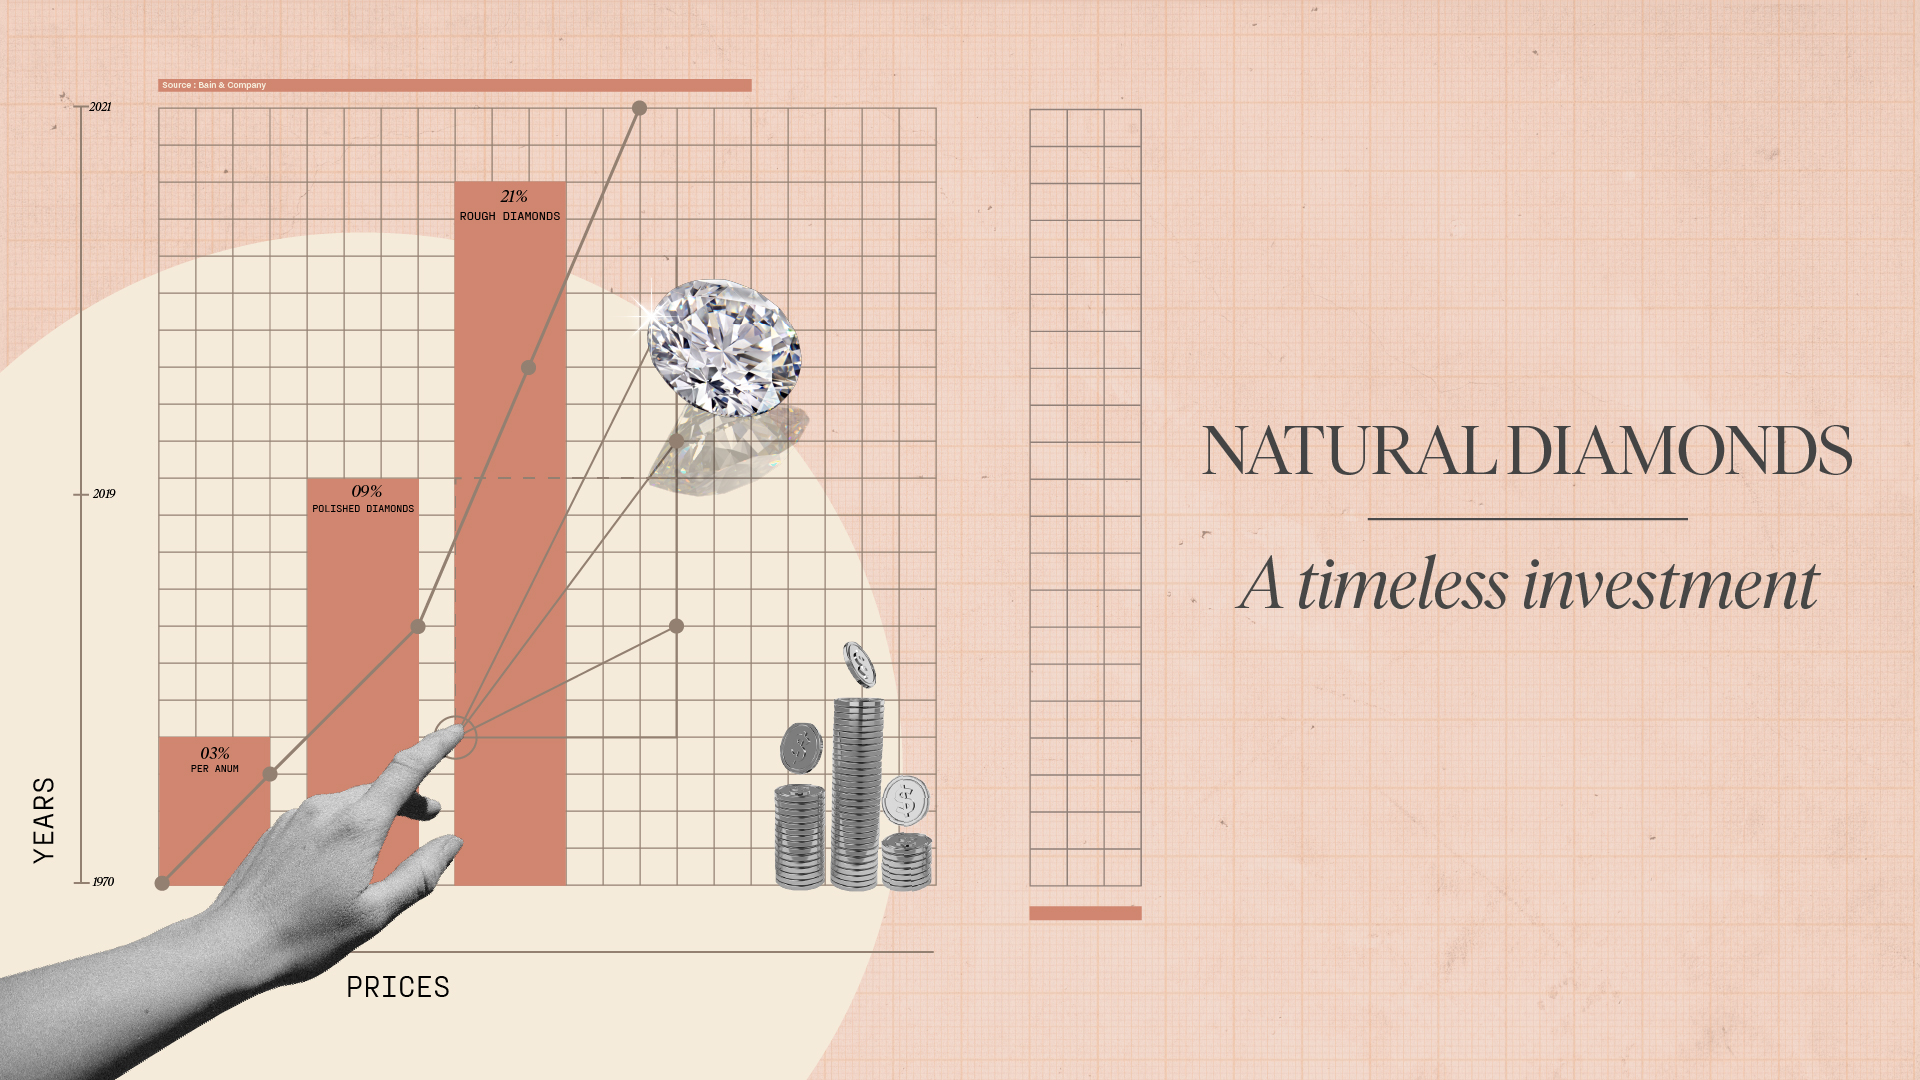 Investment in Natural Diamond